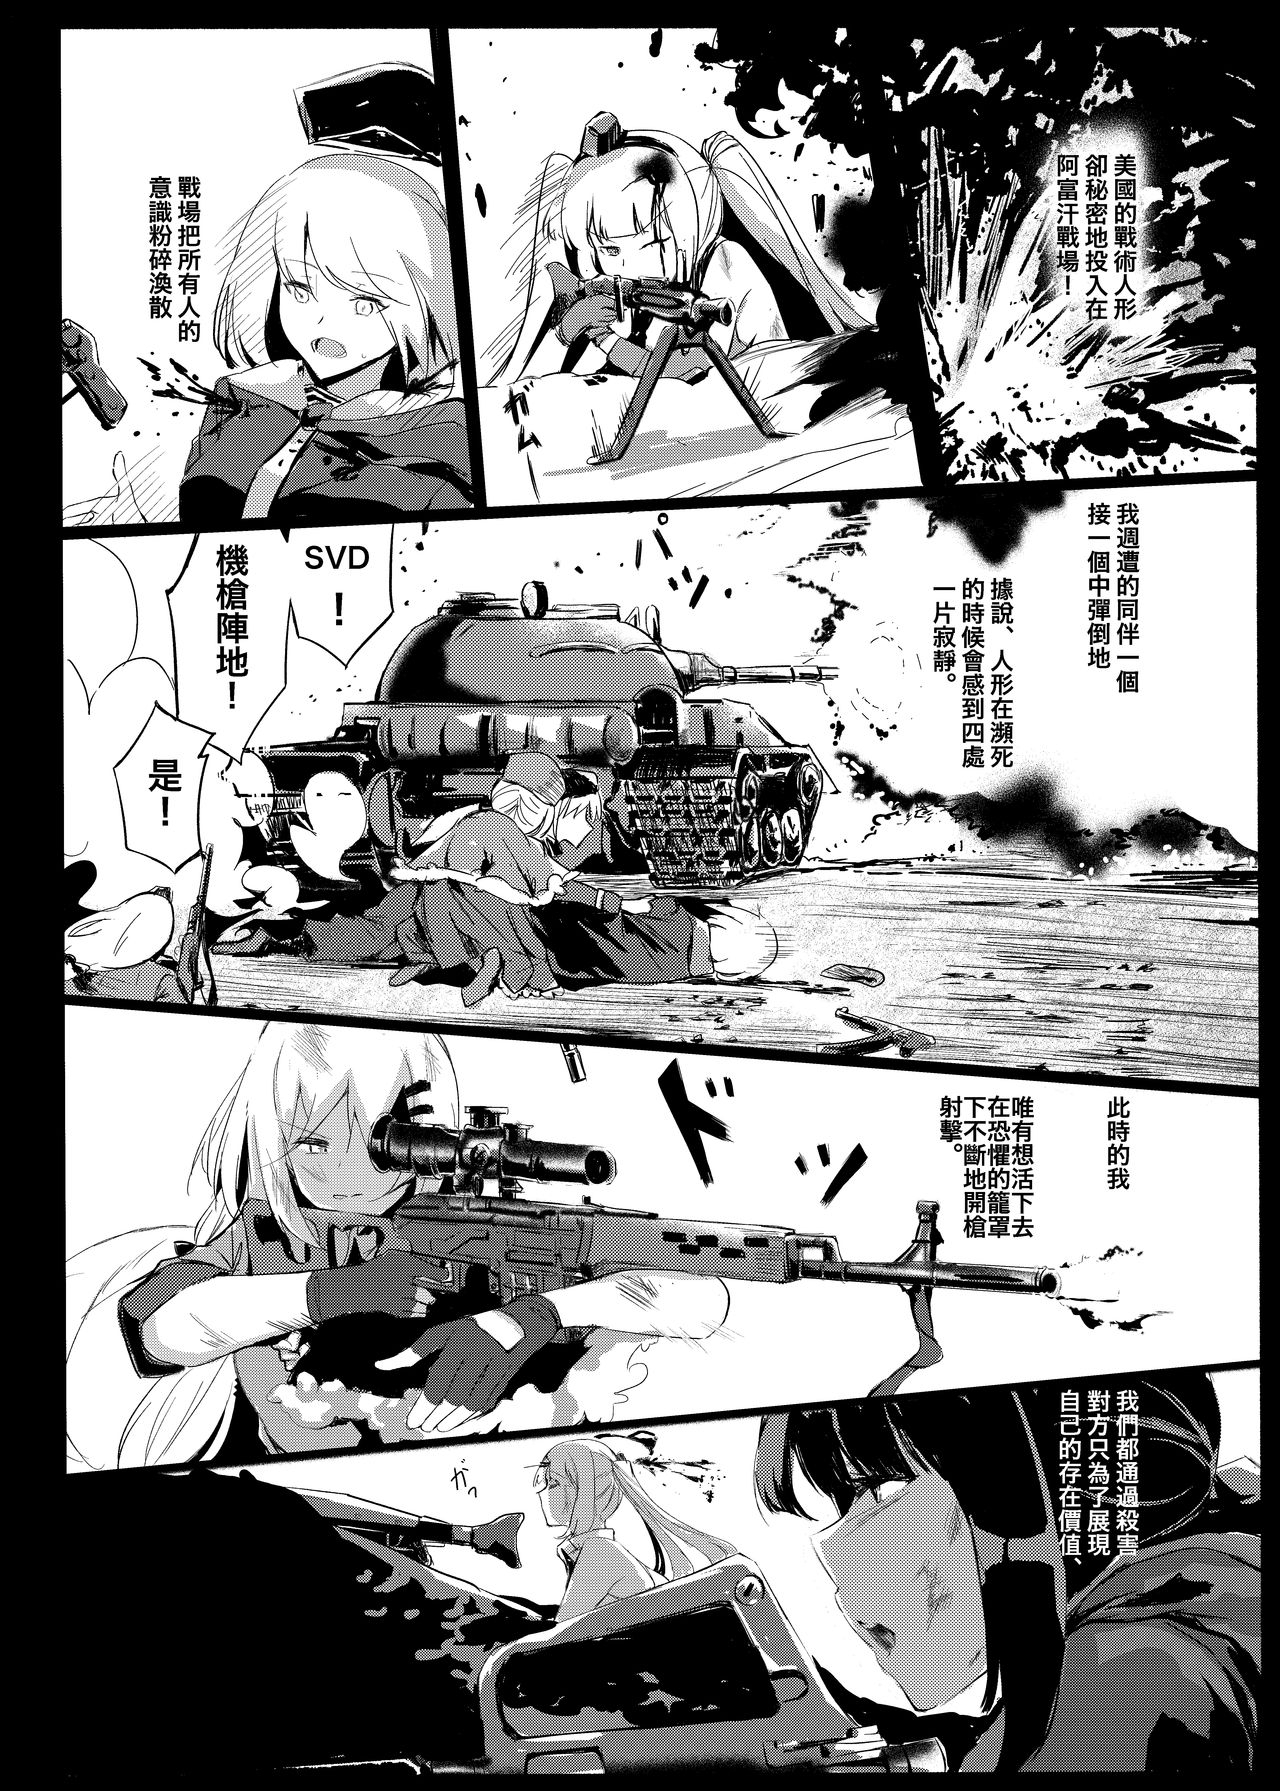 (FF33) [史本] HK416 Project (Girls' Frontline) [Chinese] [Sample] 11